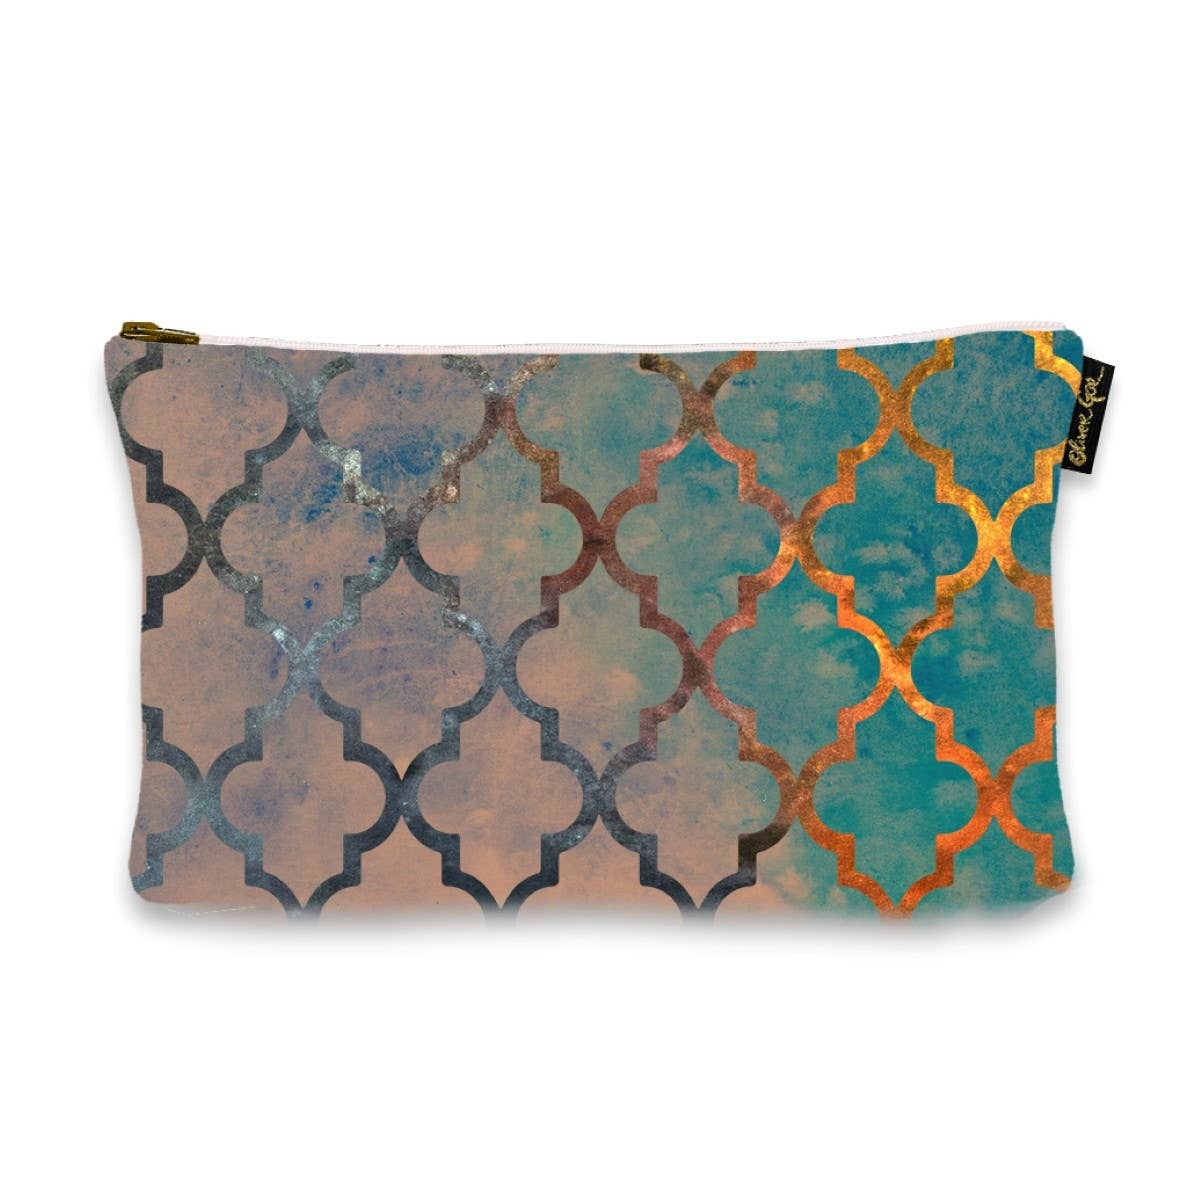 Oliver Gal 'Amour Arabesque' Pouch